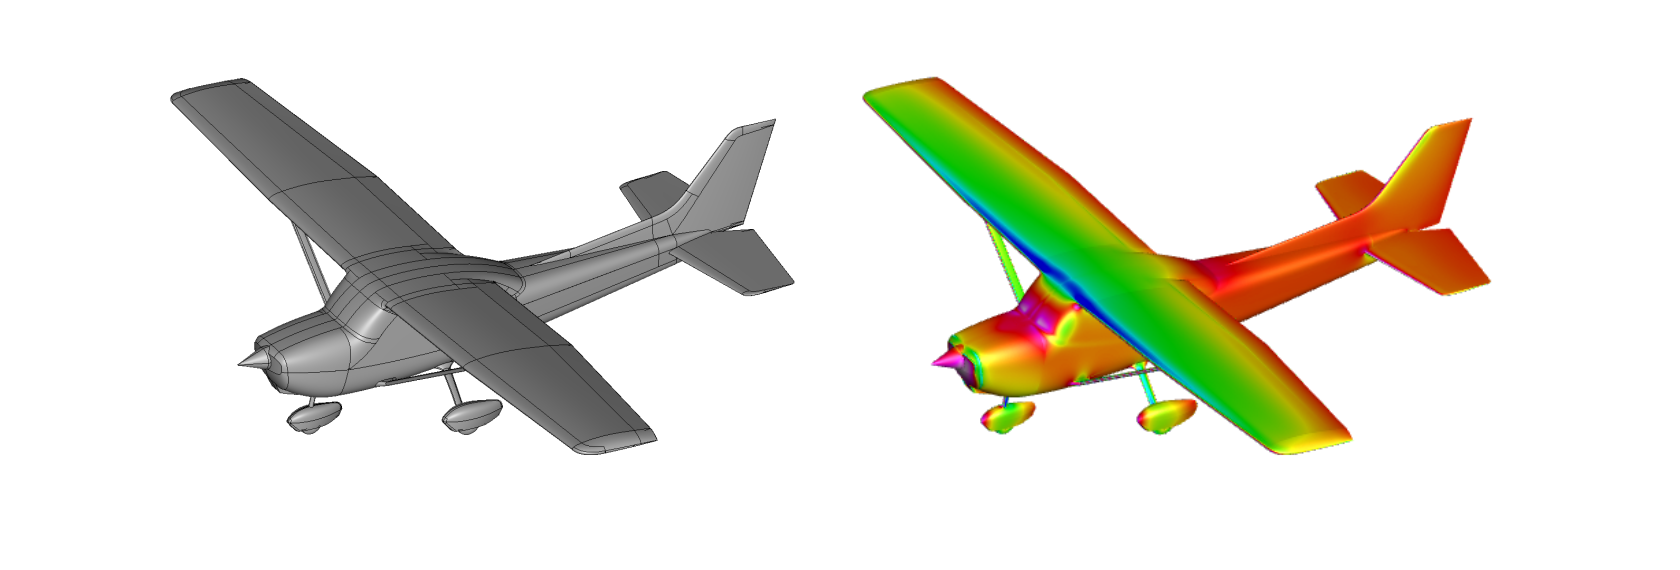 Cessna 172 Skyhawk geometry and pressure contours from CFD